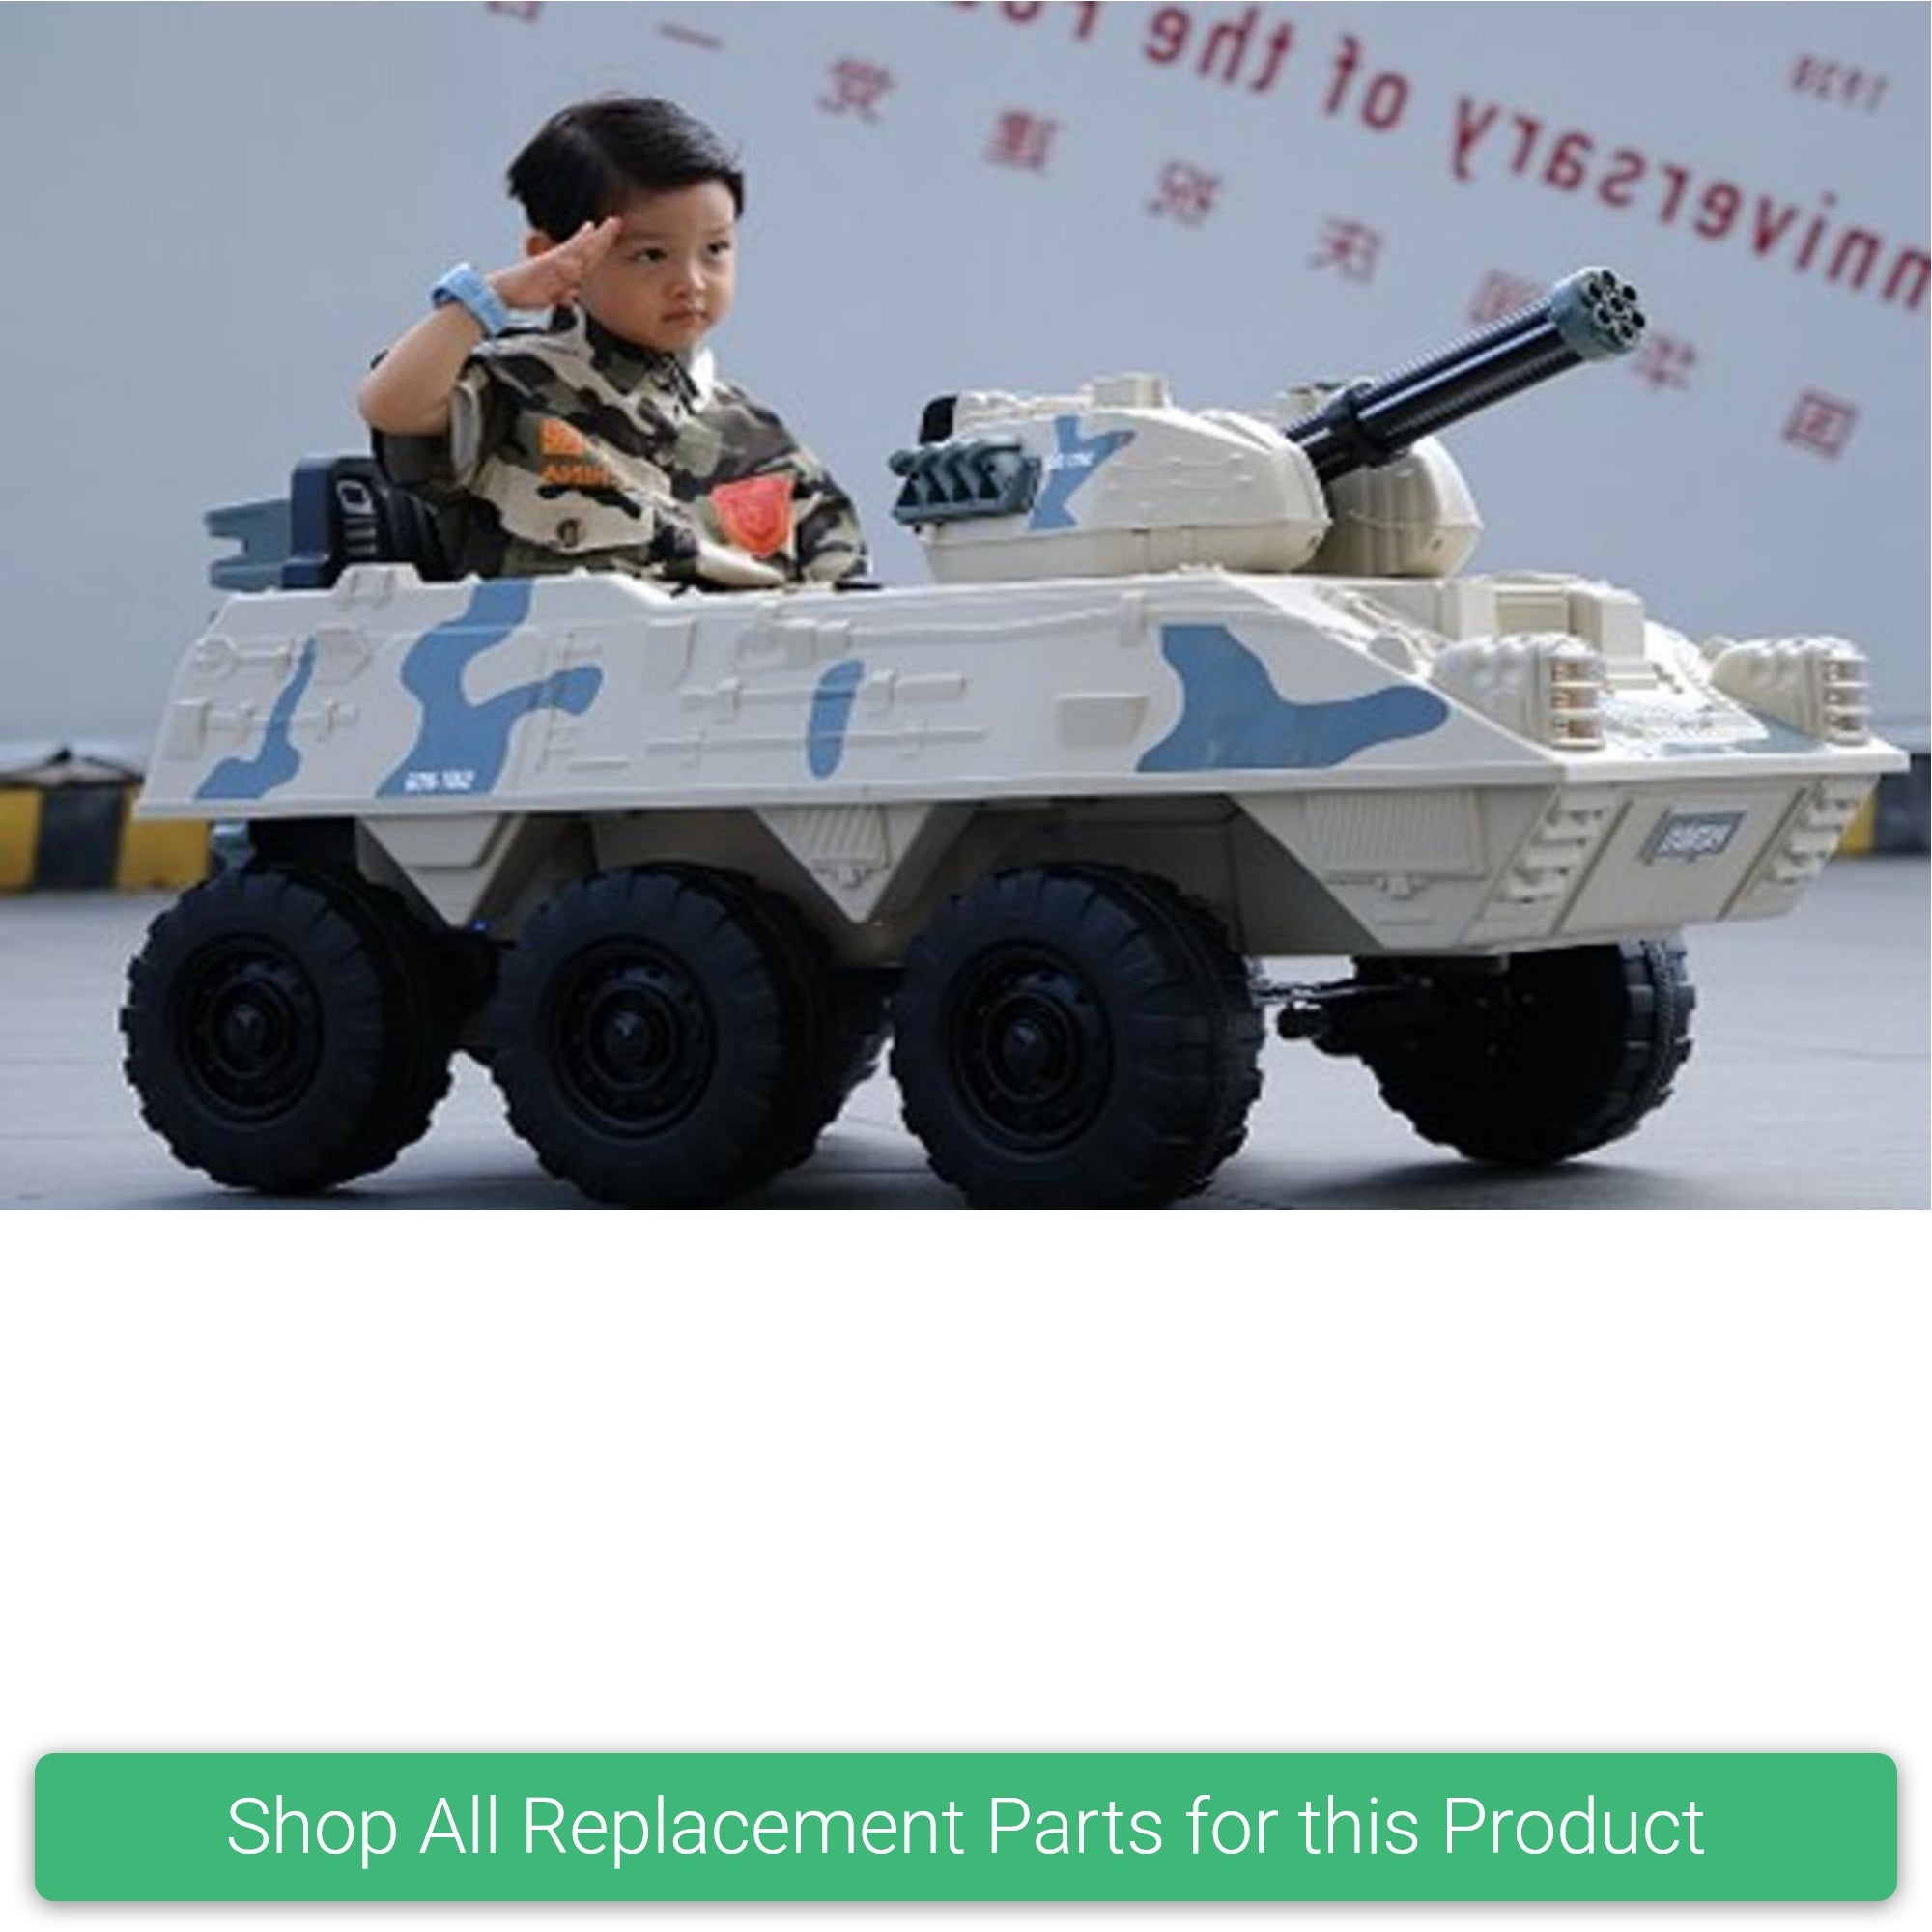 Replacement Parts and Spares for Kids Army Tank - ARMY-TANK-VARI - SMT-006